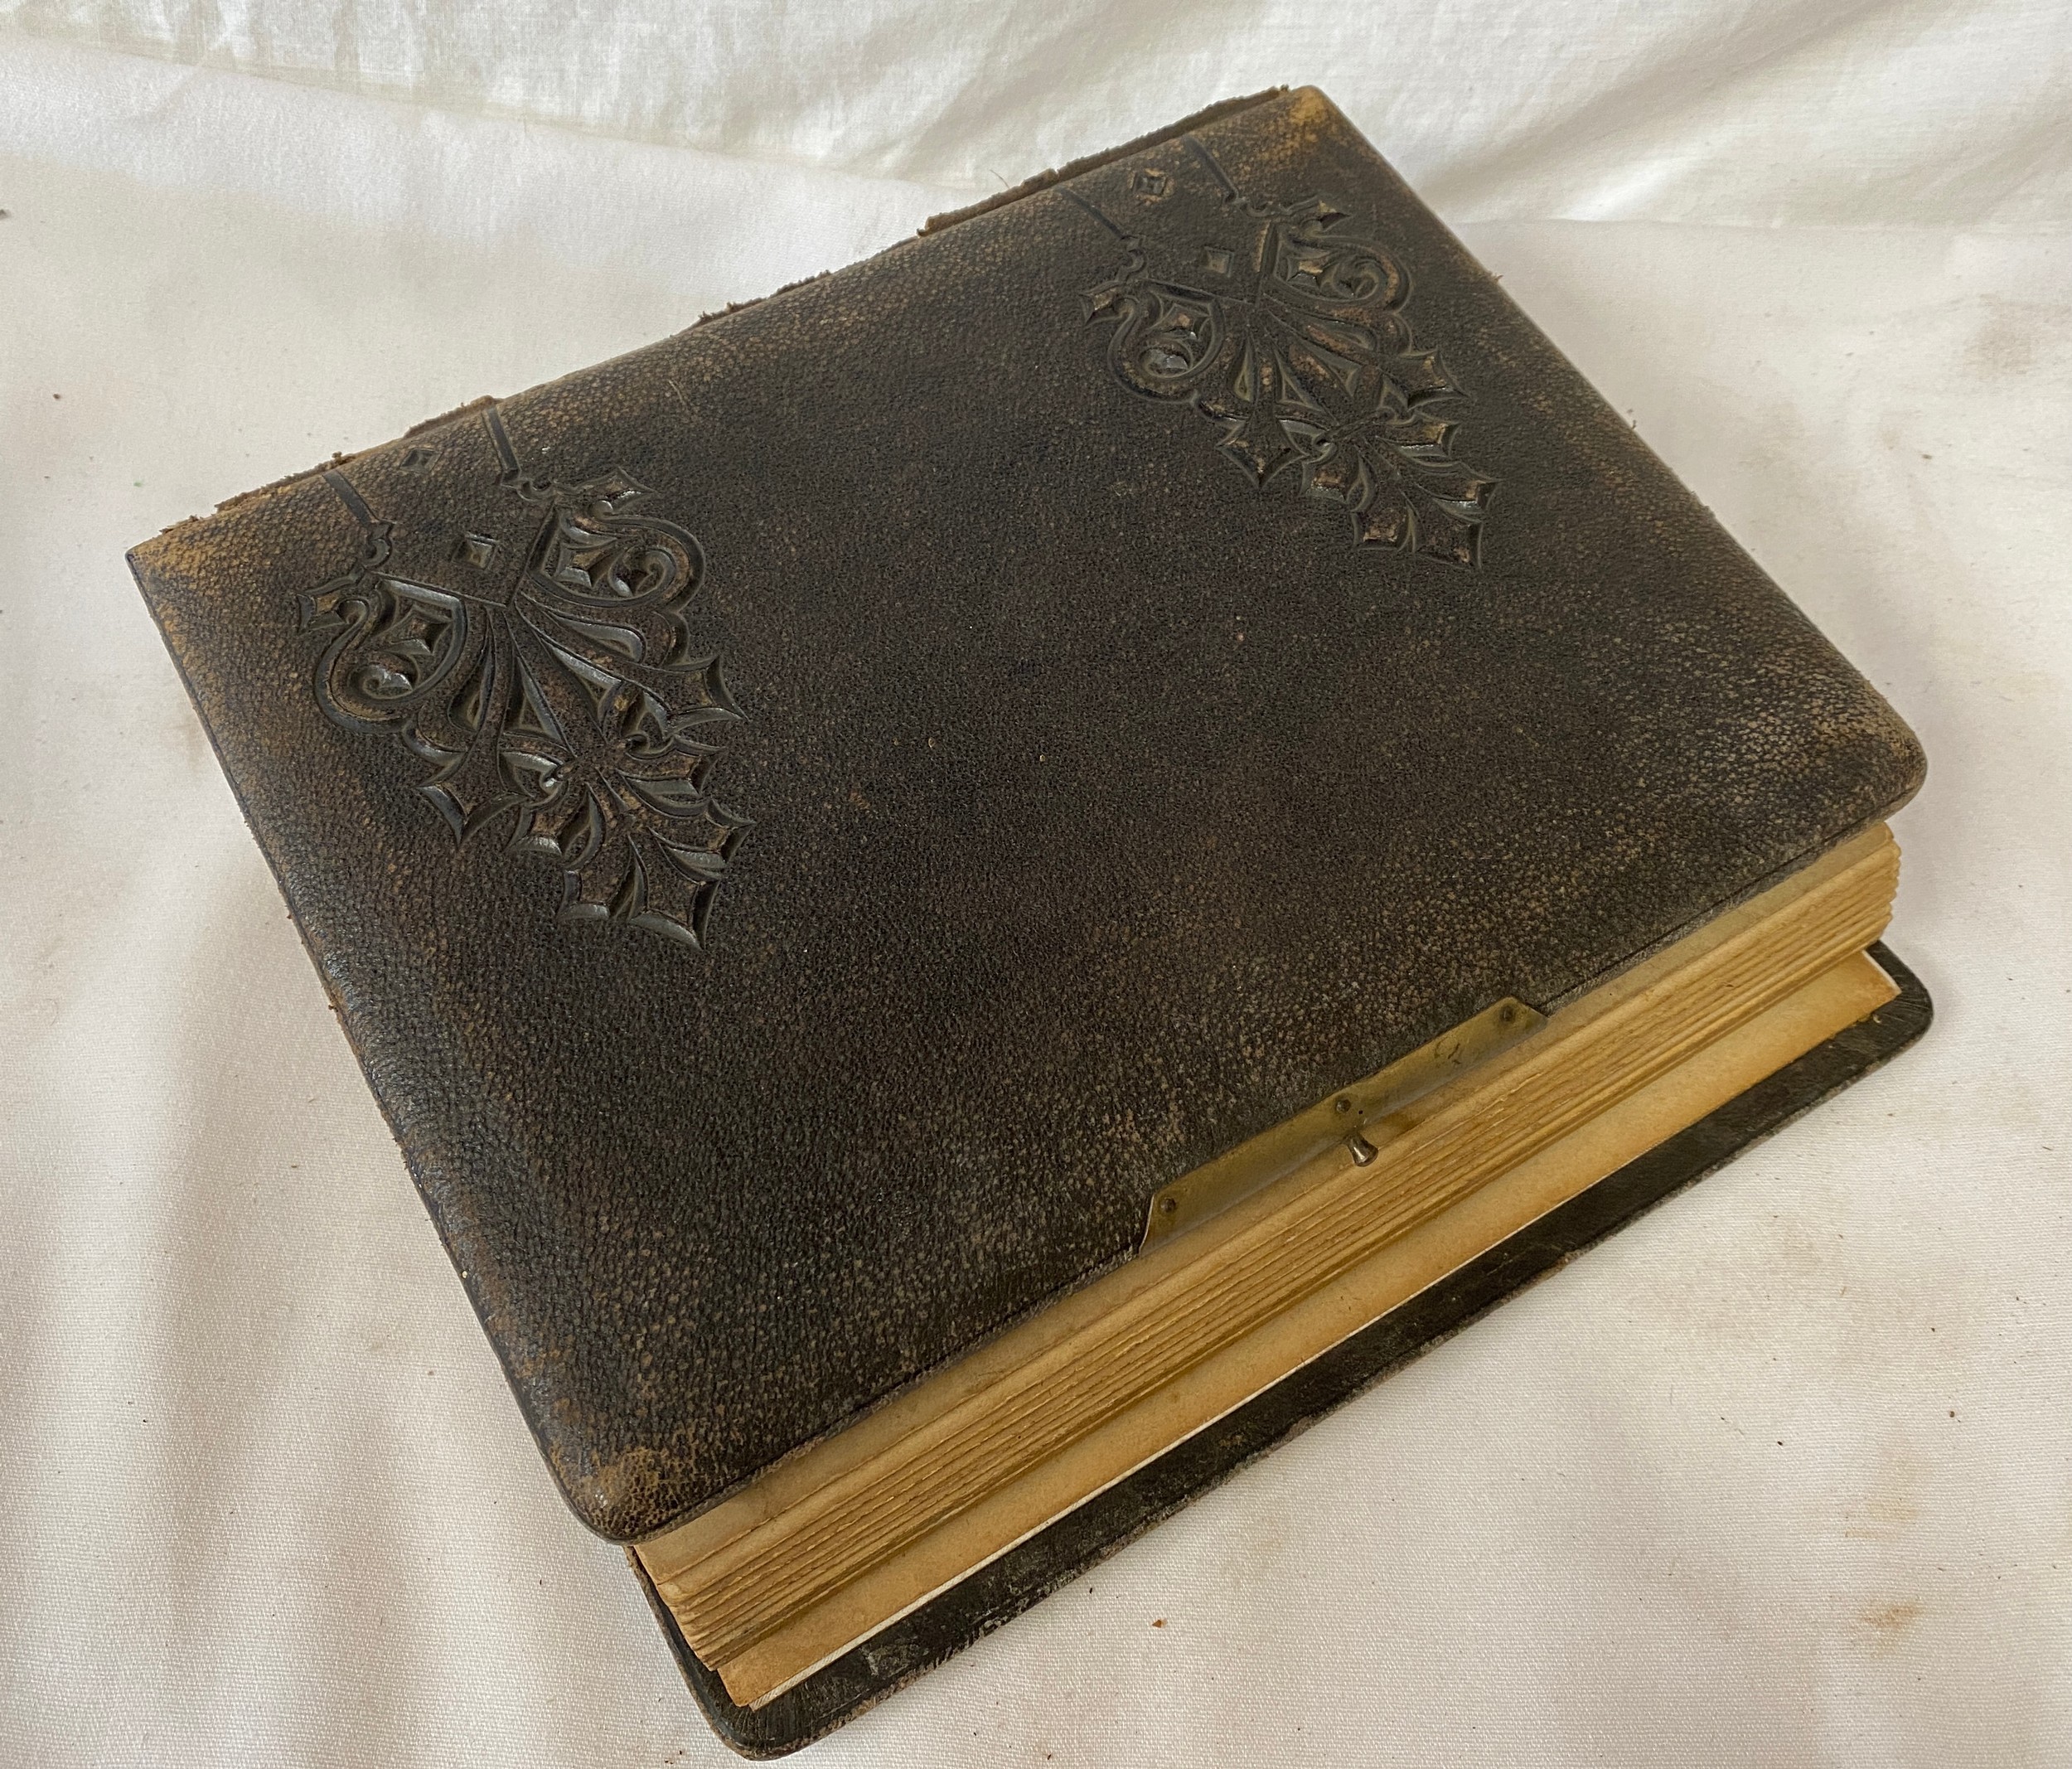 Photograph albums; Saltley College X'mas 1887 presented to Thomas Withers by his fellow students - Image 11 of 30